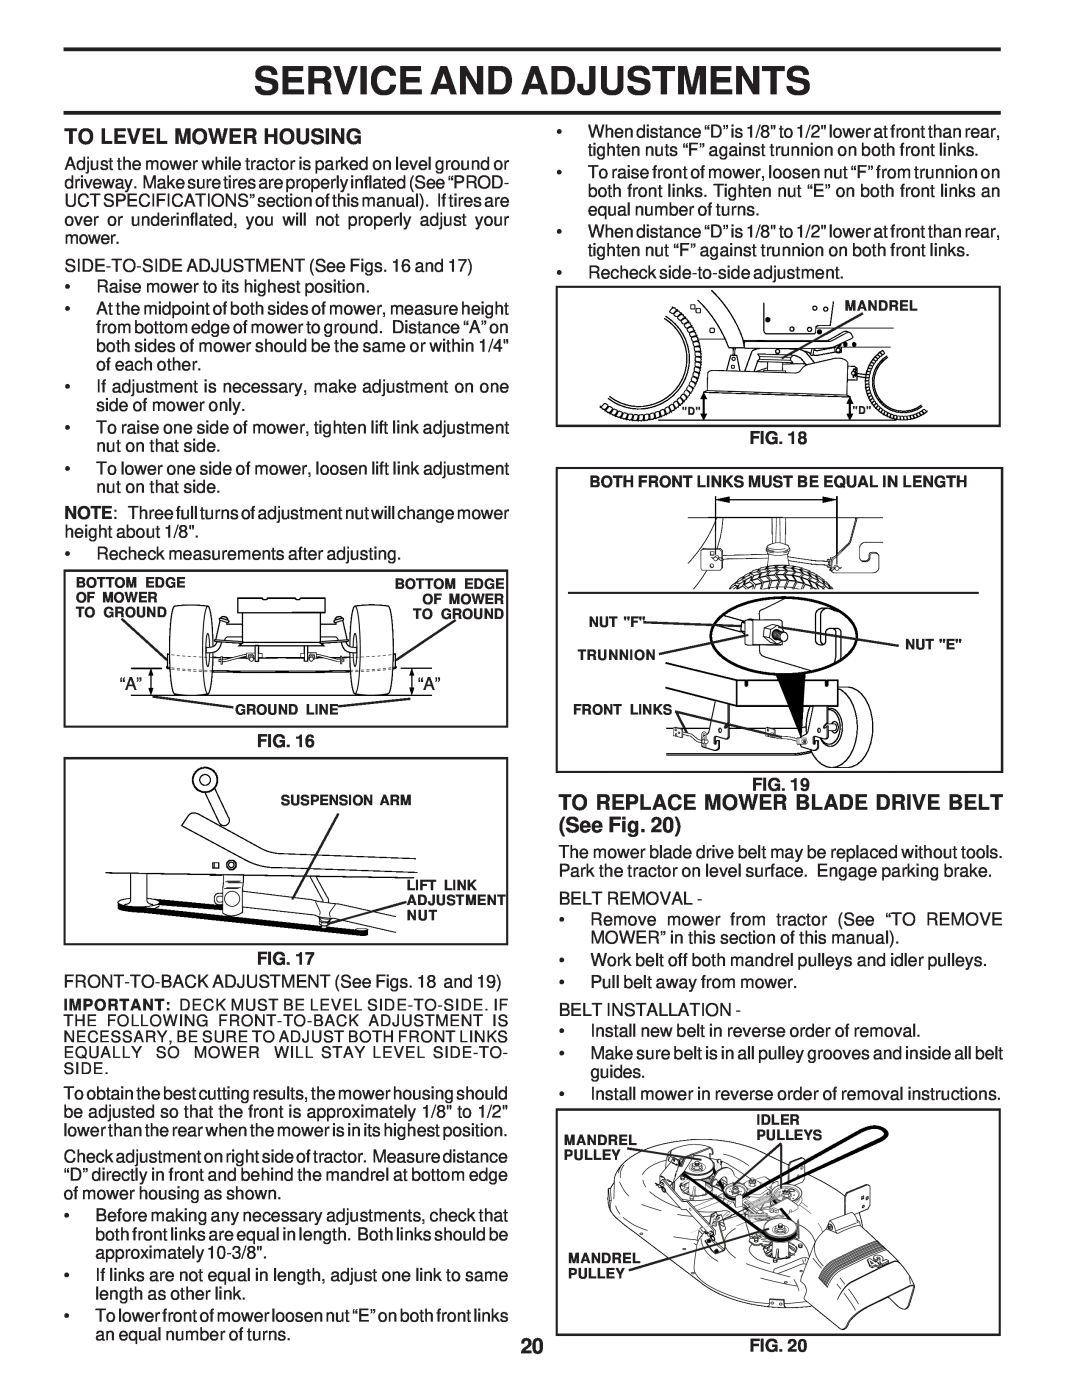 Weed Eater WE12542F, 174193 To Level Mower Housing, TO REPLACE MOWER BLADE DRIVE BELT See Fig, Service And Adjustments 